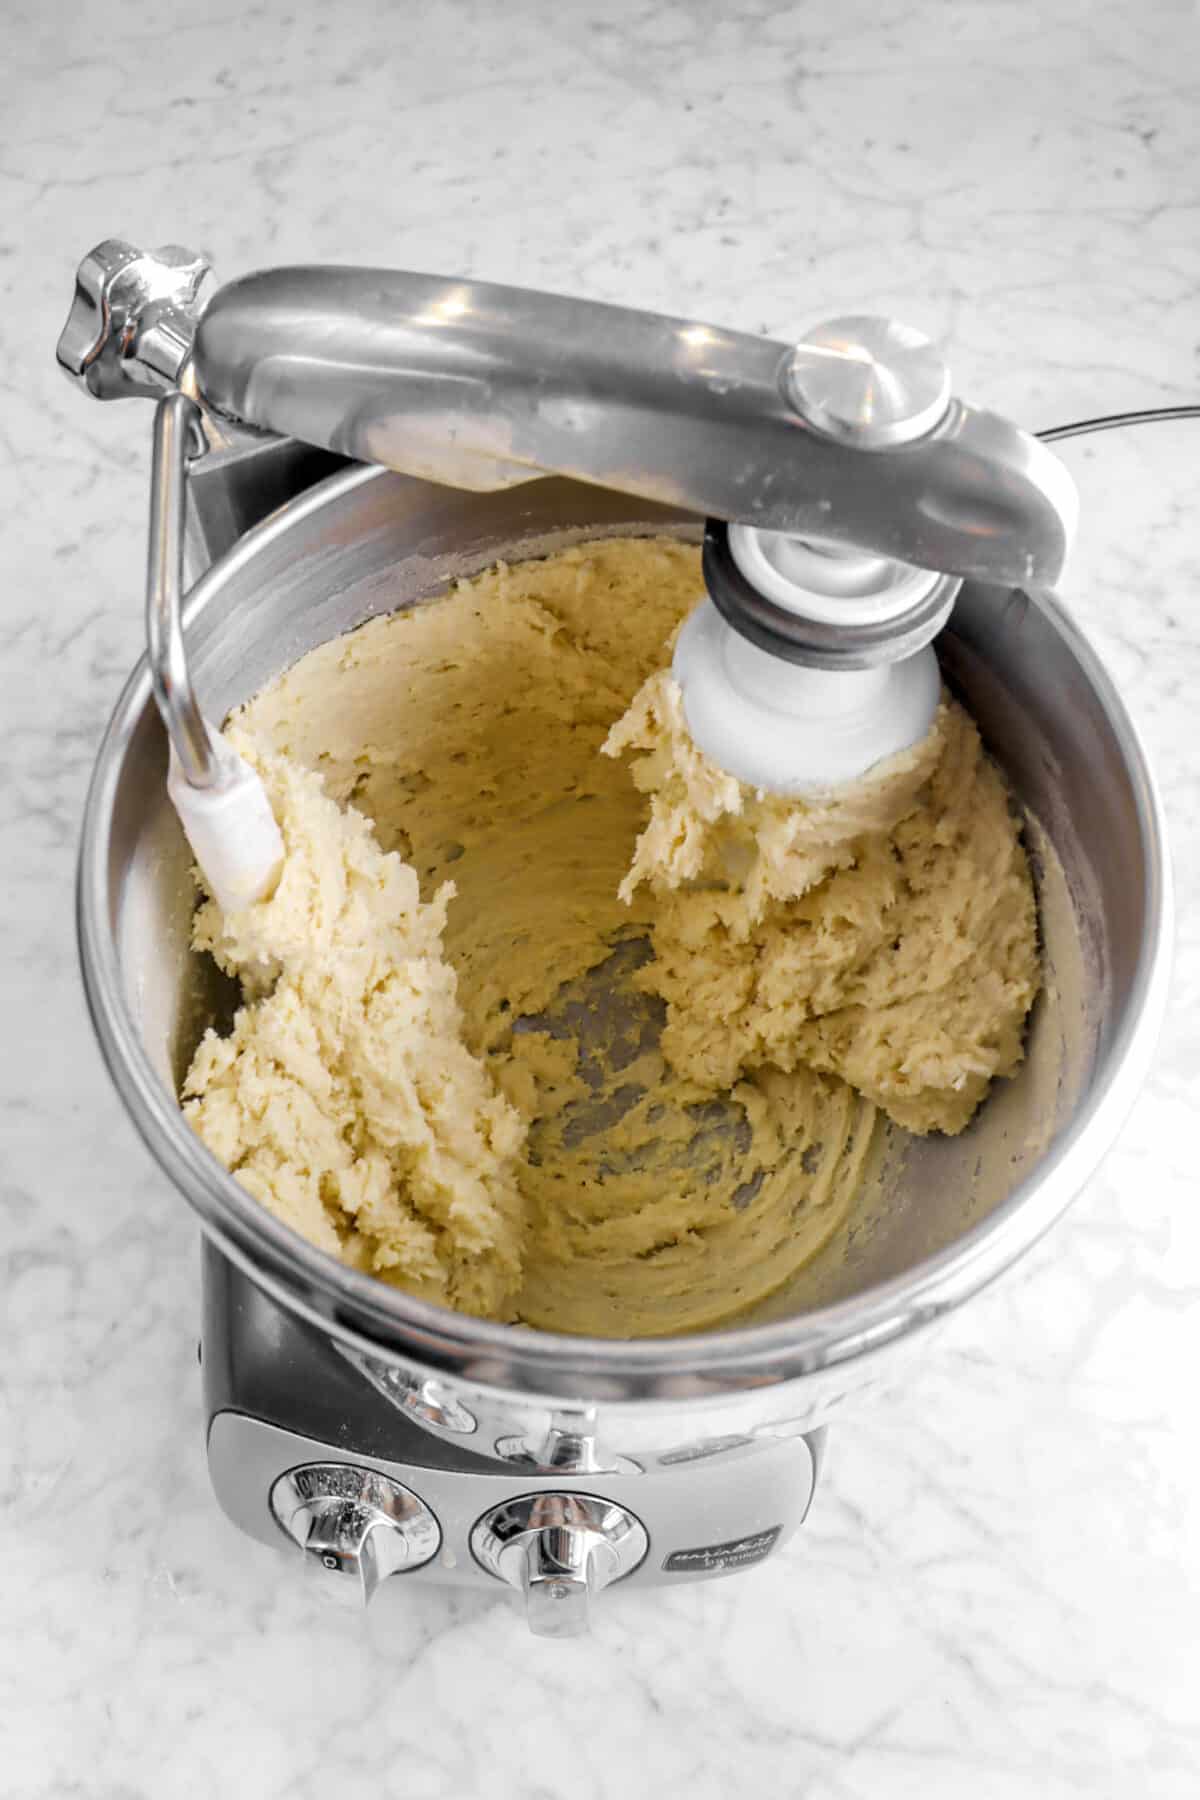 thick cake batter in mixer bowl